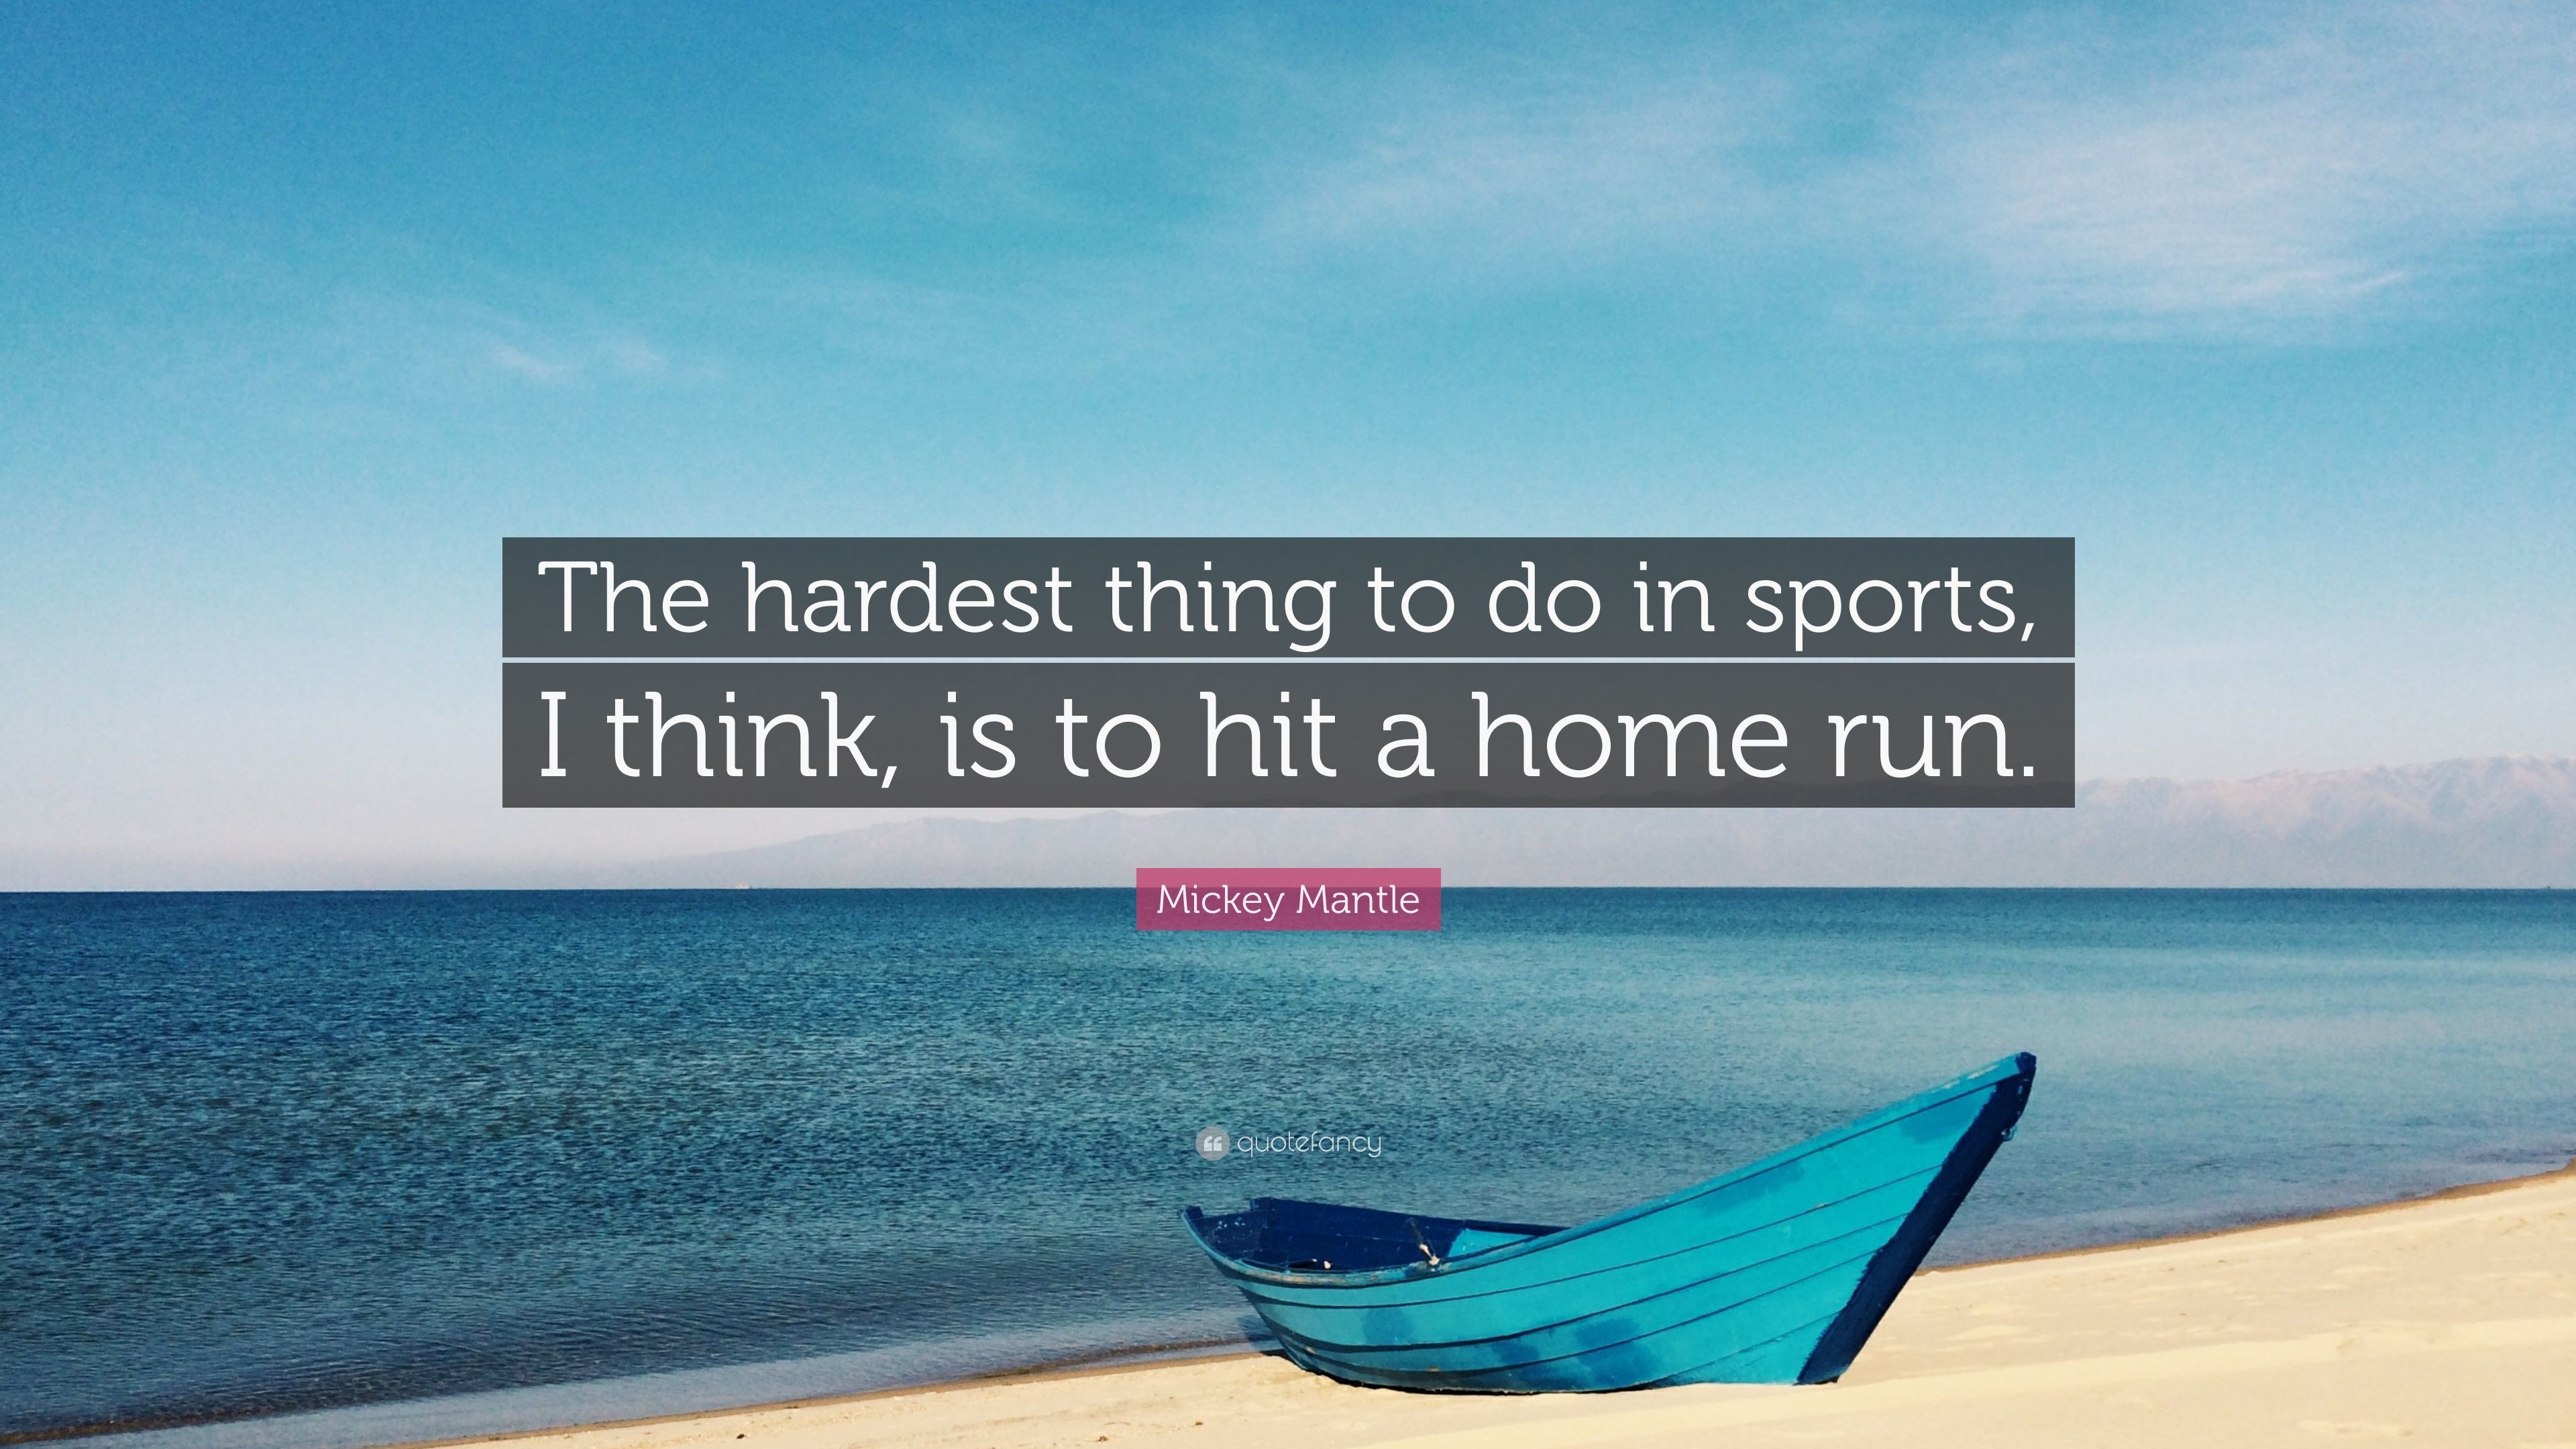 Mickey Mantle Quote: “The hardest thing to do in sports, I think,